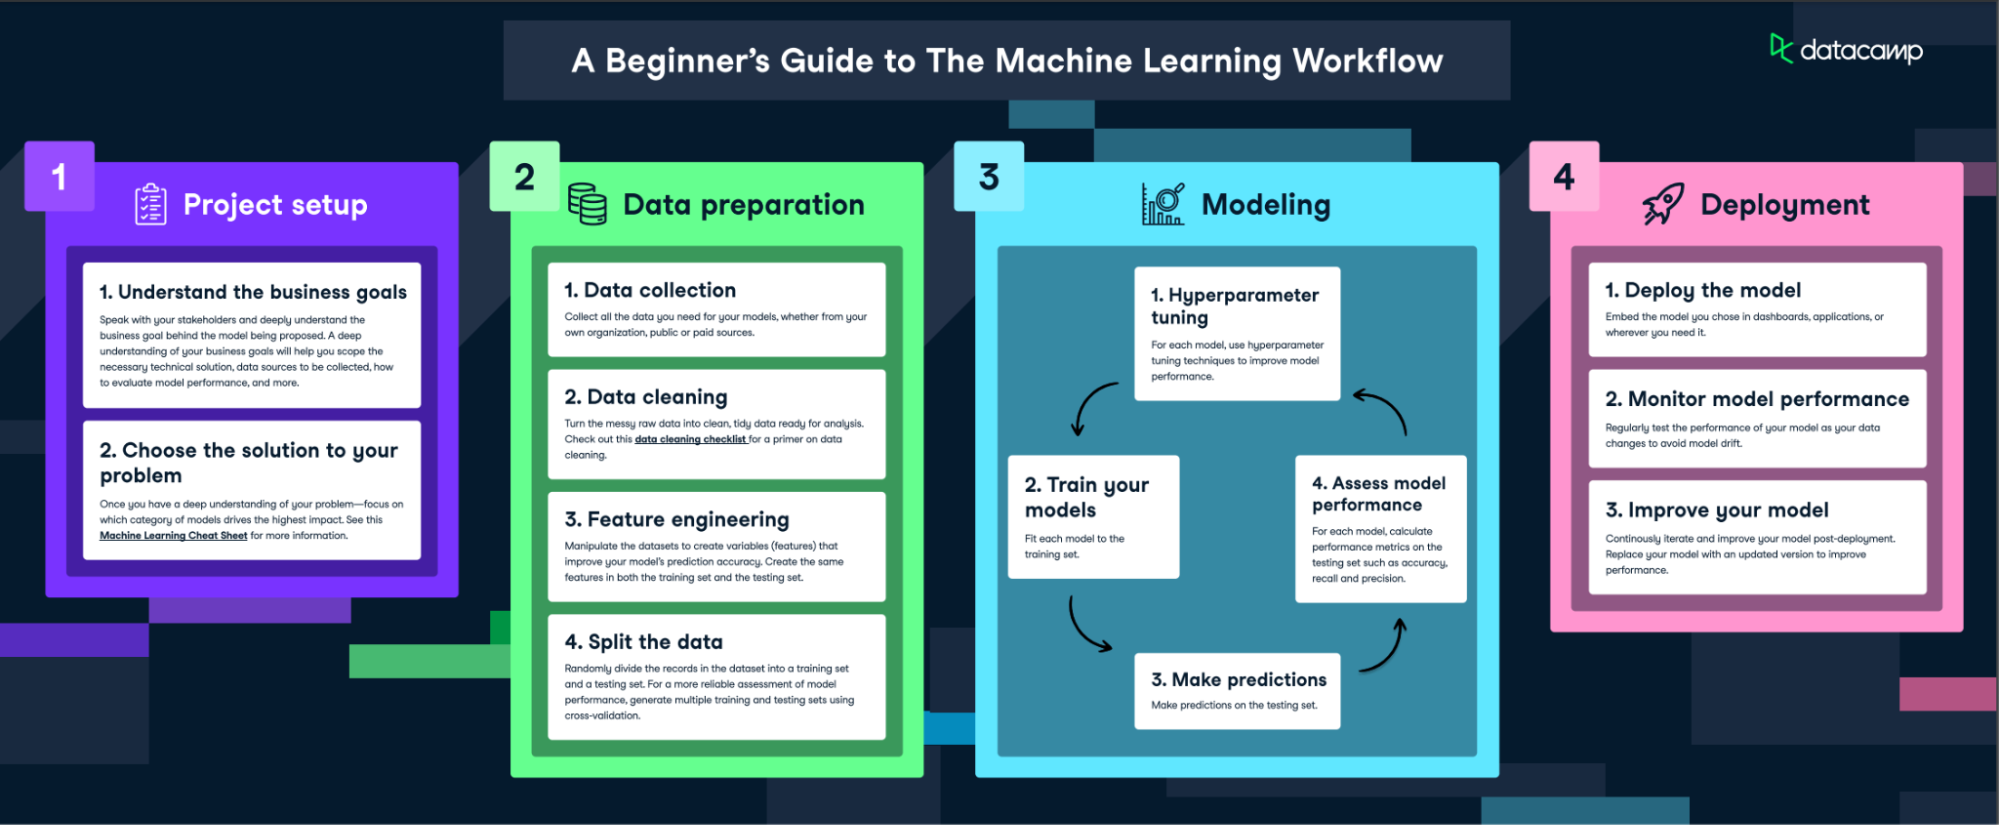 A beginner's guide to the Machine Learning Workflow